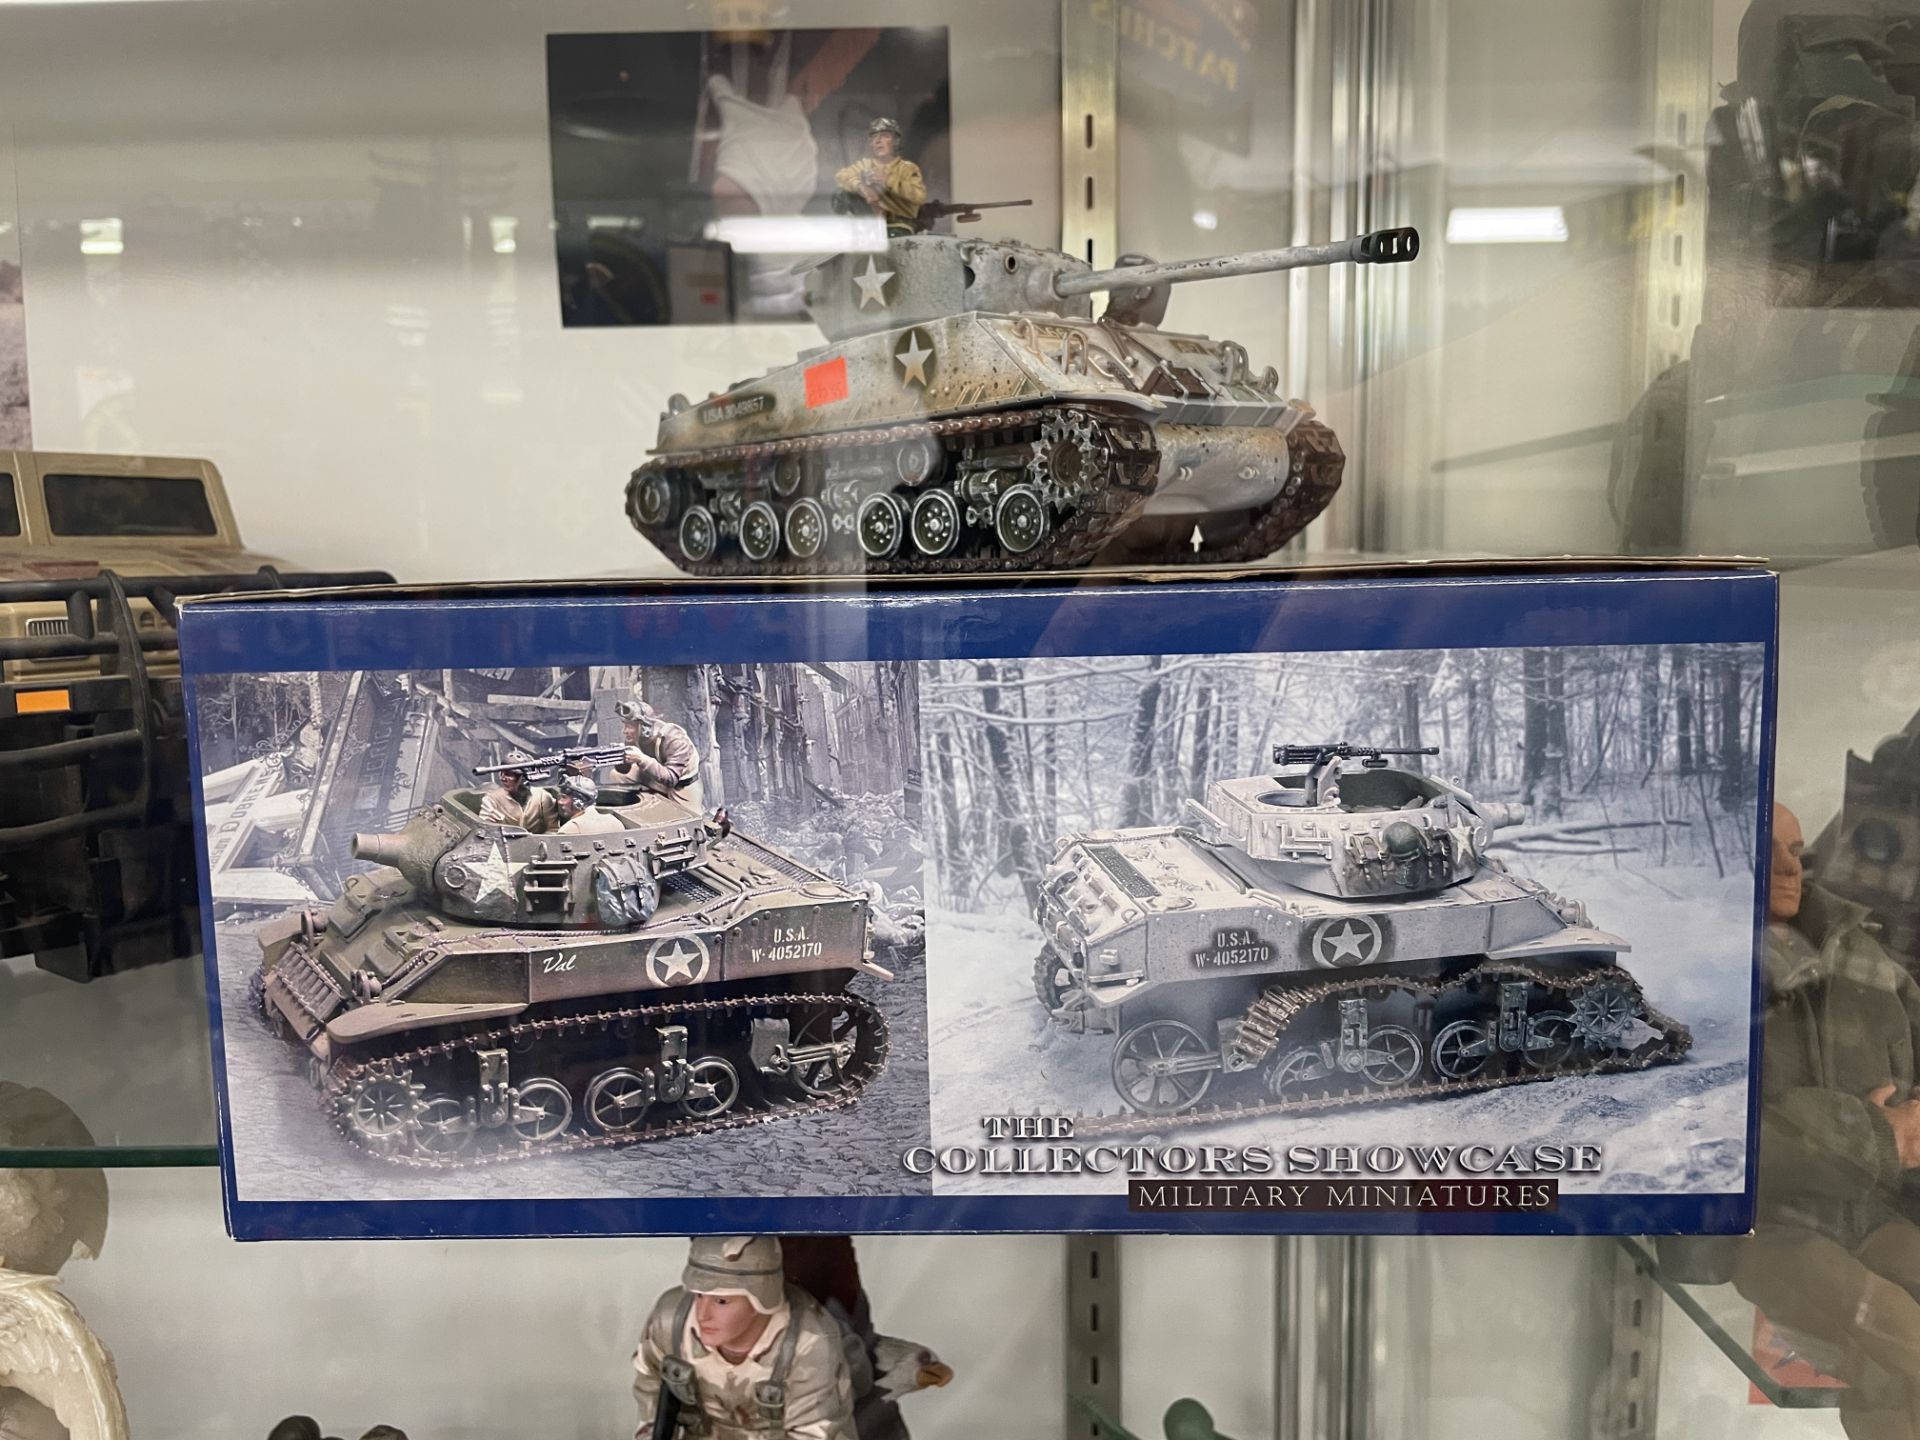 Collectors Showcase Military Miniatures Fully Assembled Model Sherman Tank w/ Box - Image 2 of 2